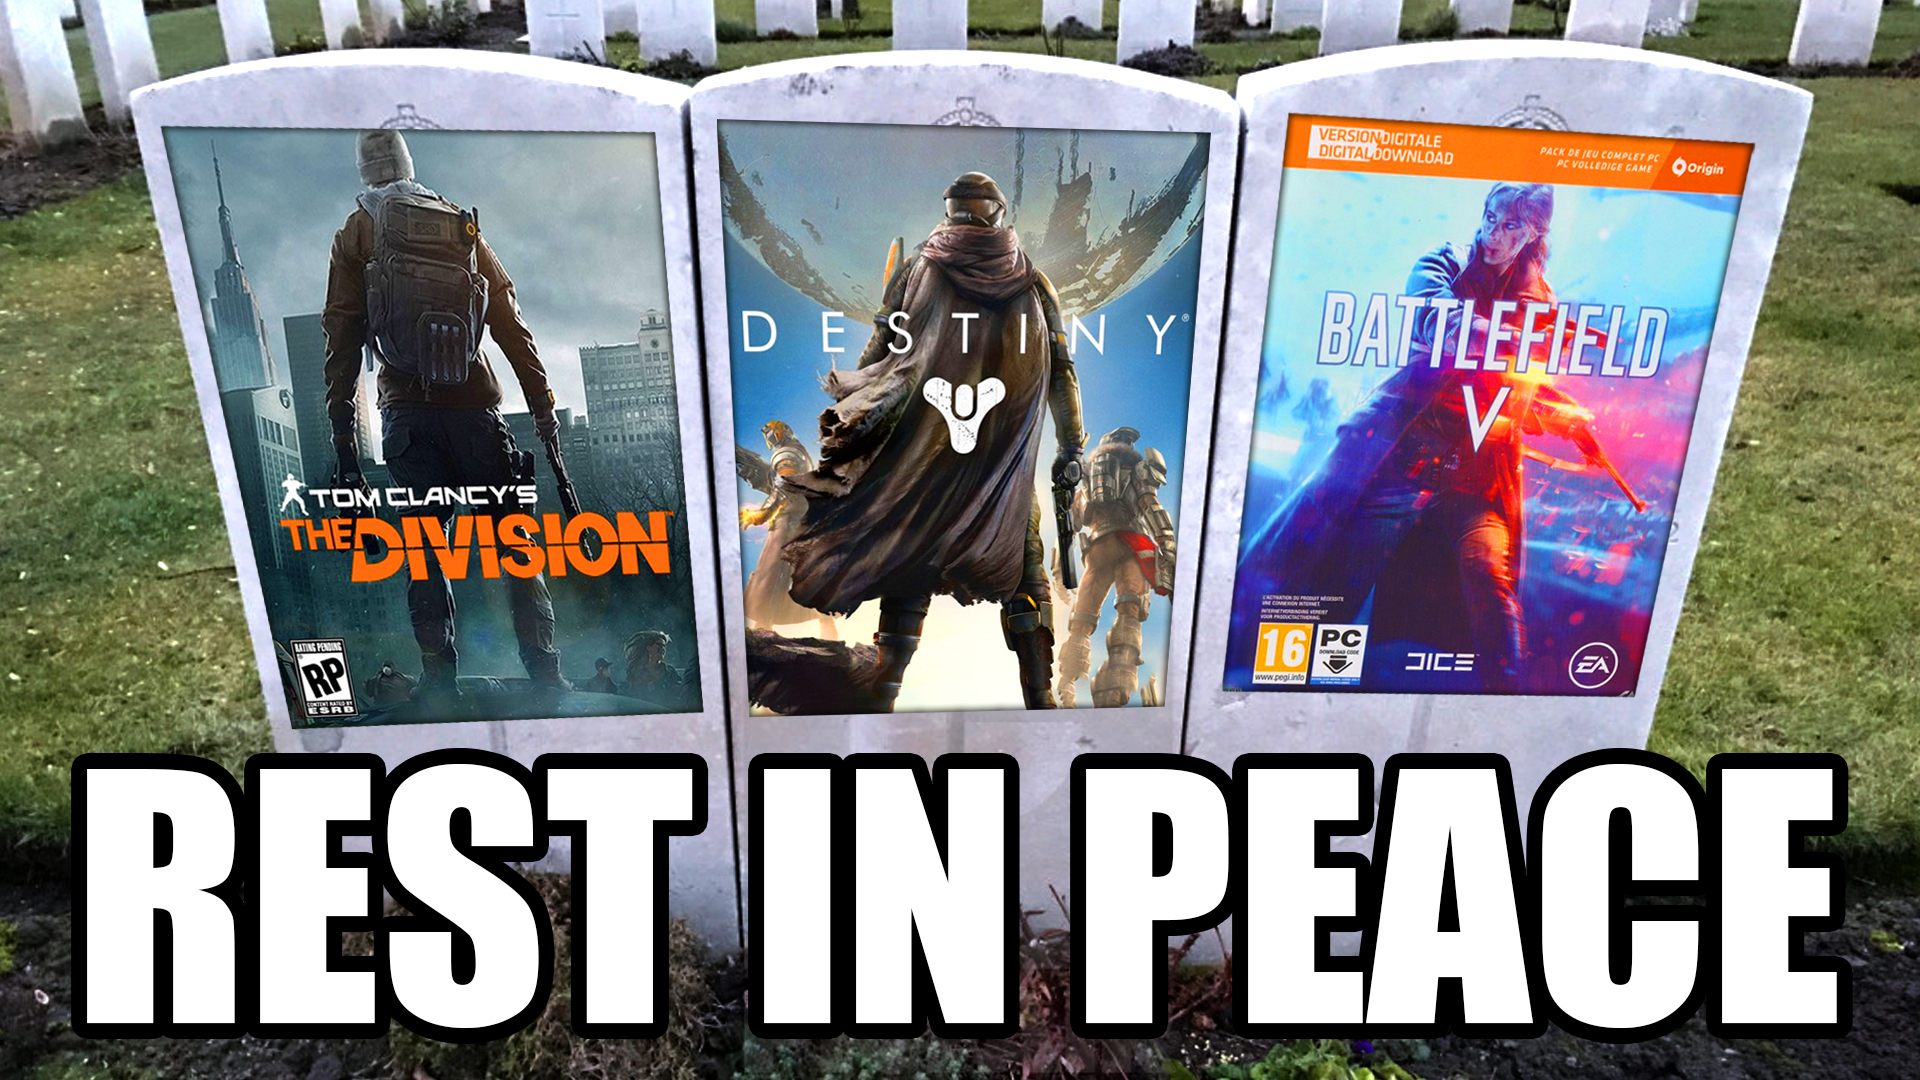 video game box art -  home resonance - Ci Destiny Battlefield V Tomclancy'S Thedivision Pc Jice Rp Rest In Peace